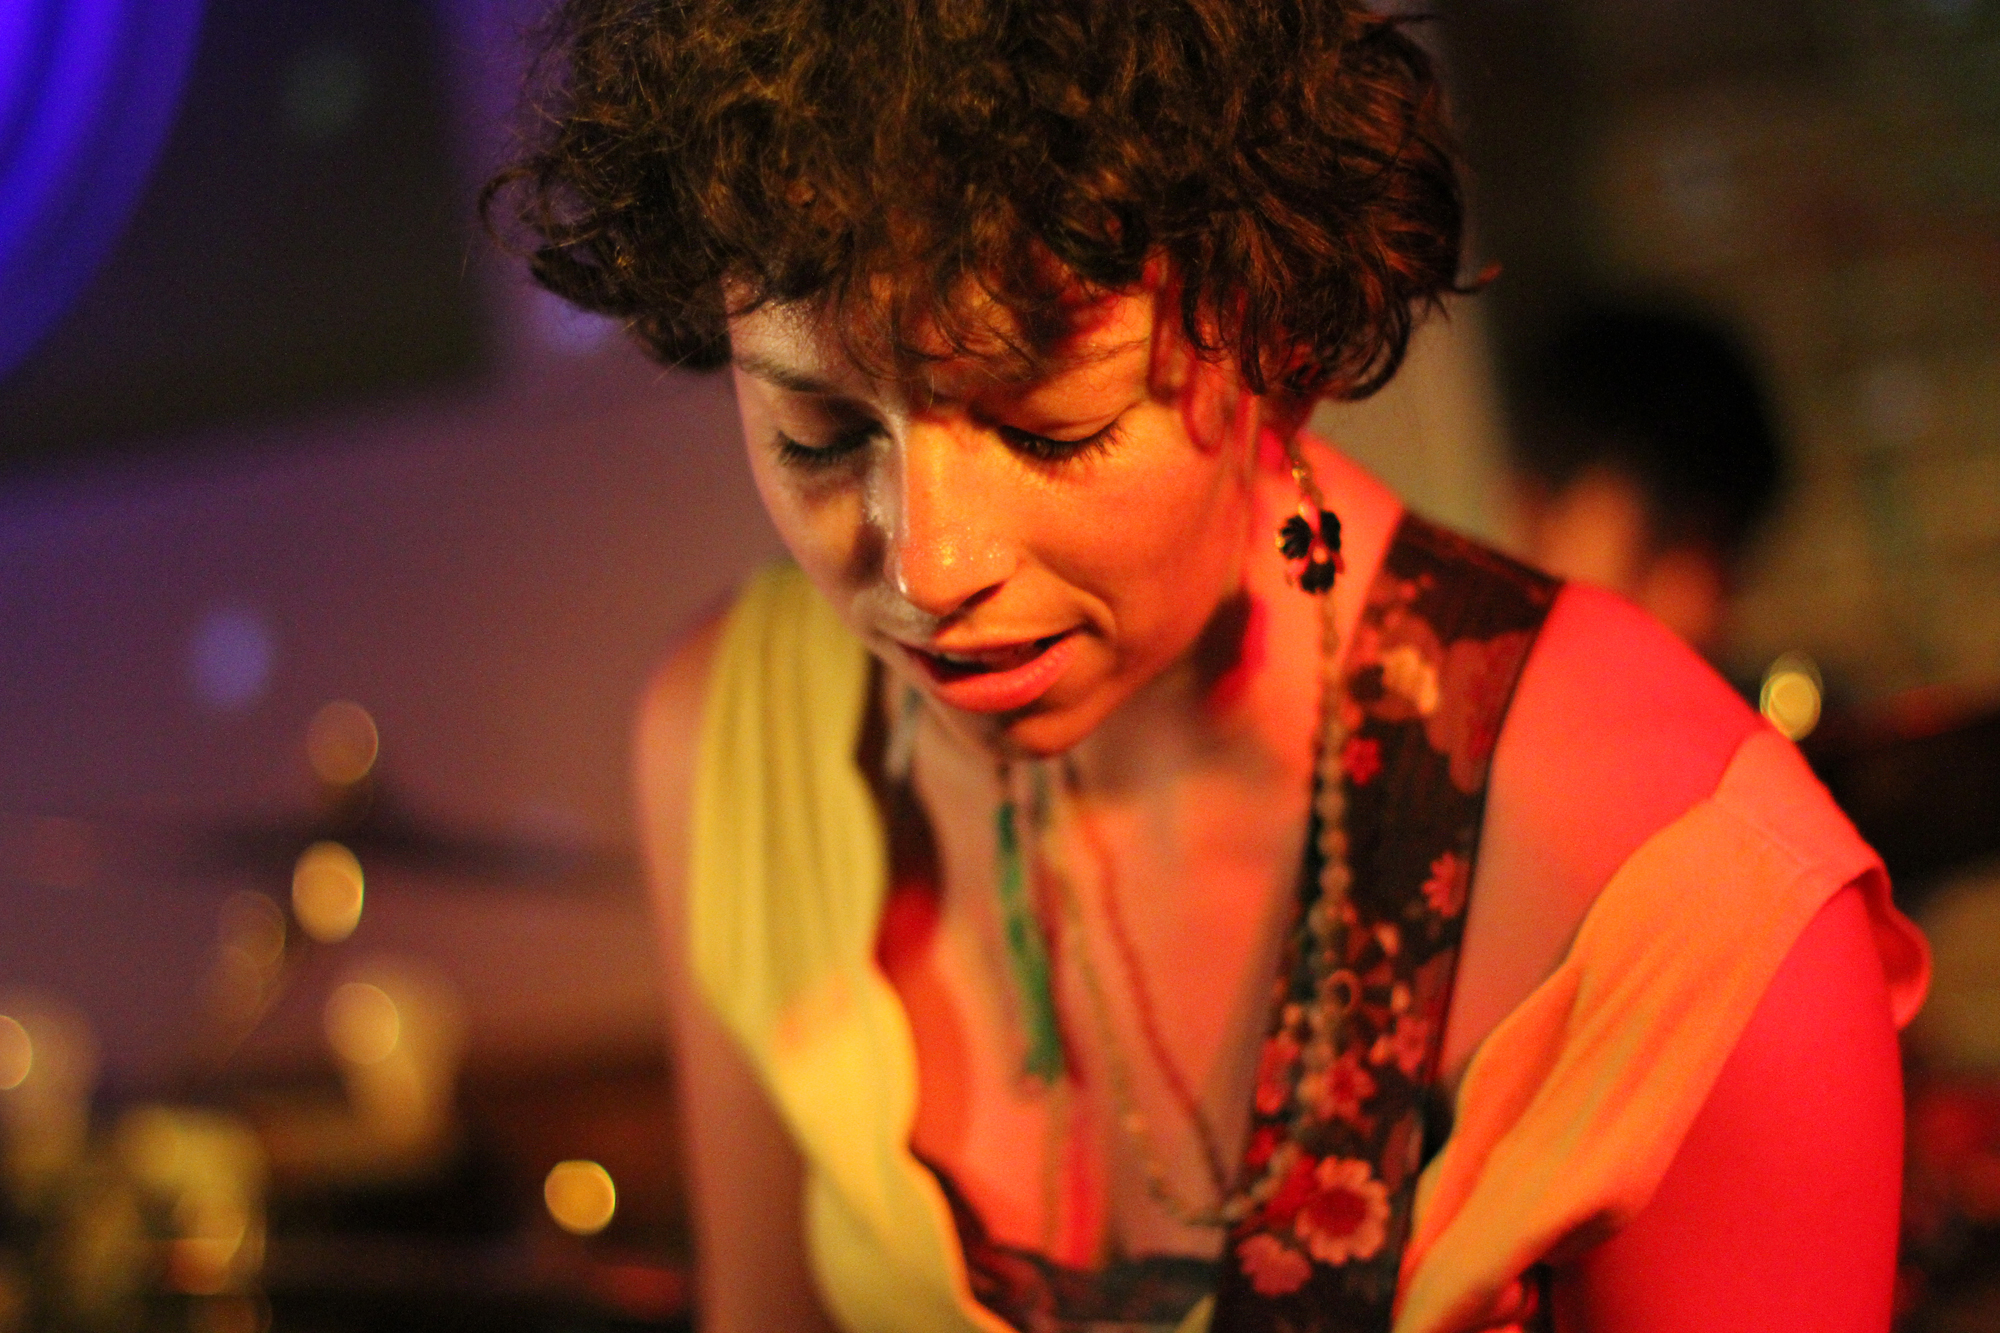 The Luyas performs at Spill during South By Southwest in Austin, Texas on March 19, 2011.